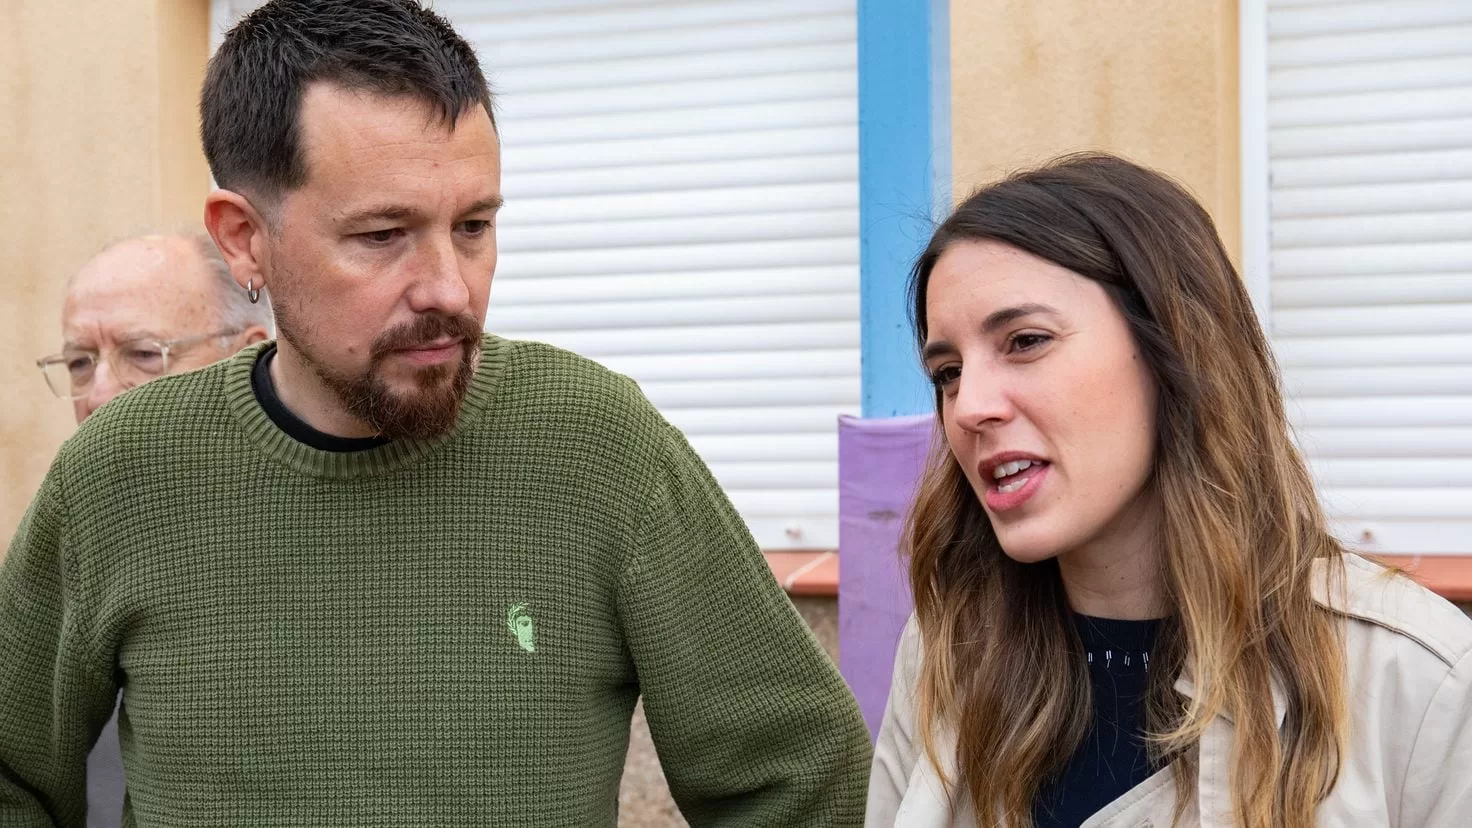 Irene Montero, on having an open relationship with Pablo Iglesias: I am a jealous person
